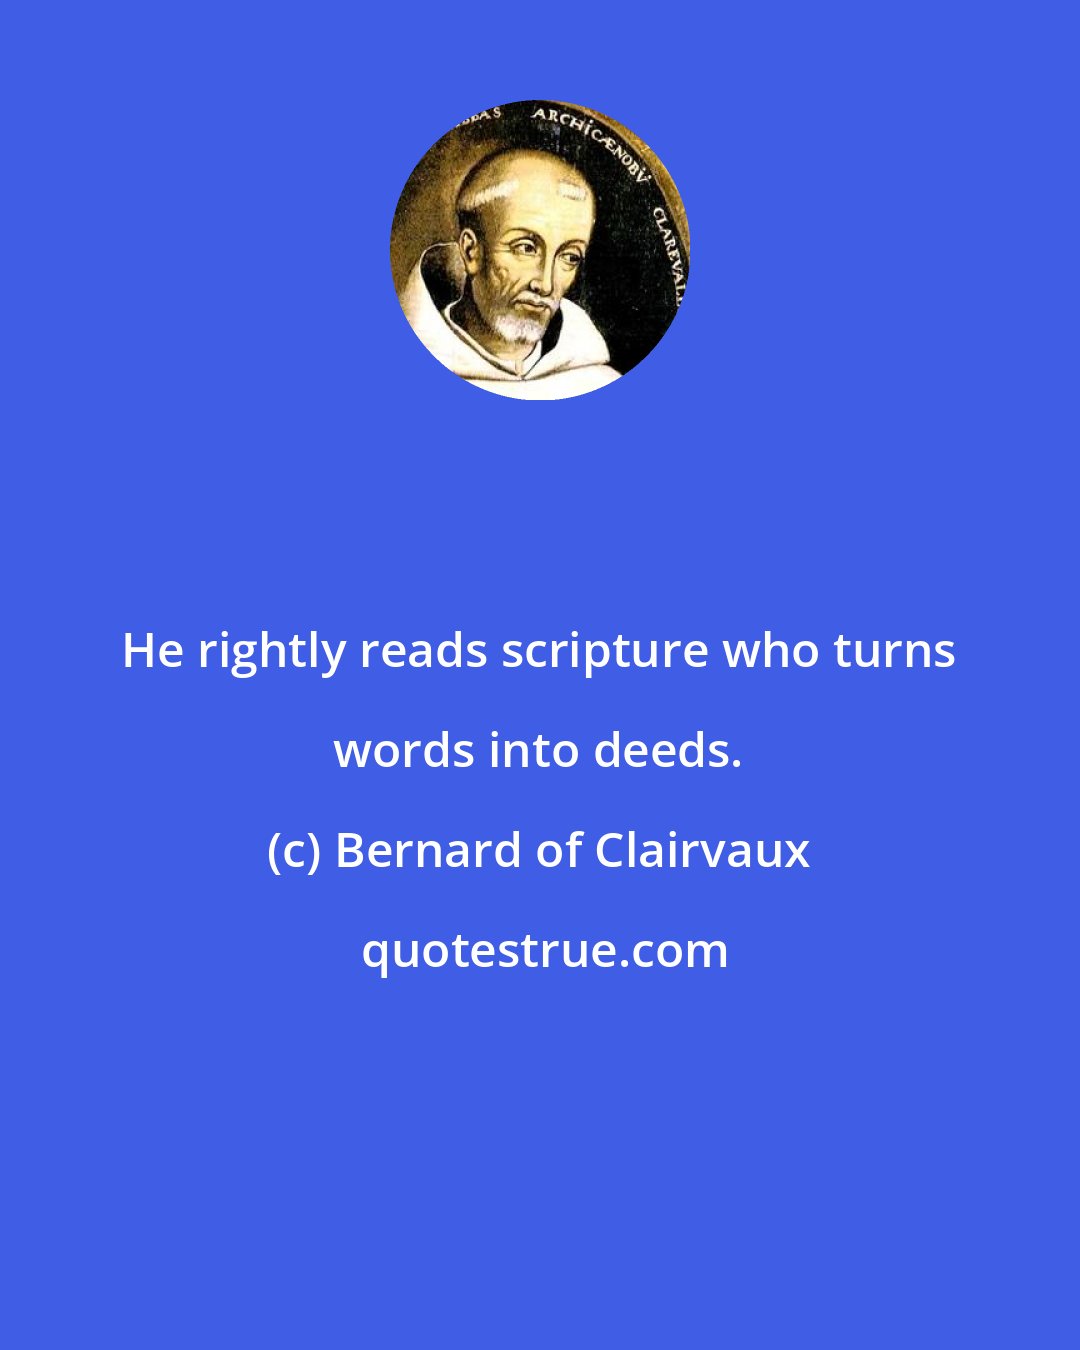 Bernard of Clairvaux: He rightly reads scripture who turns words into deeds.